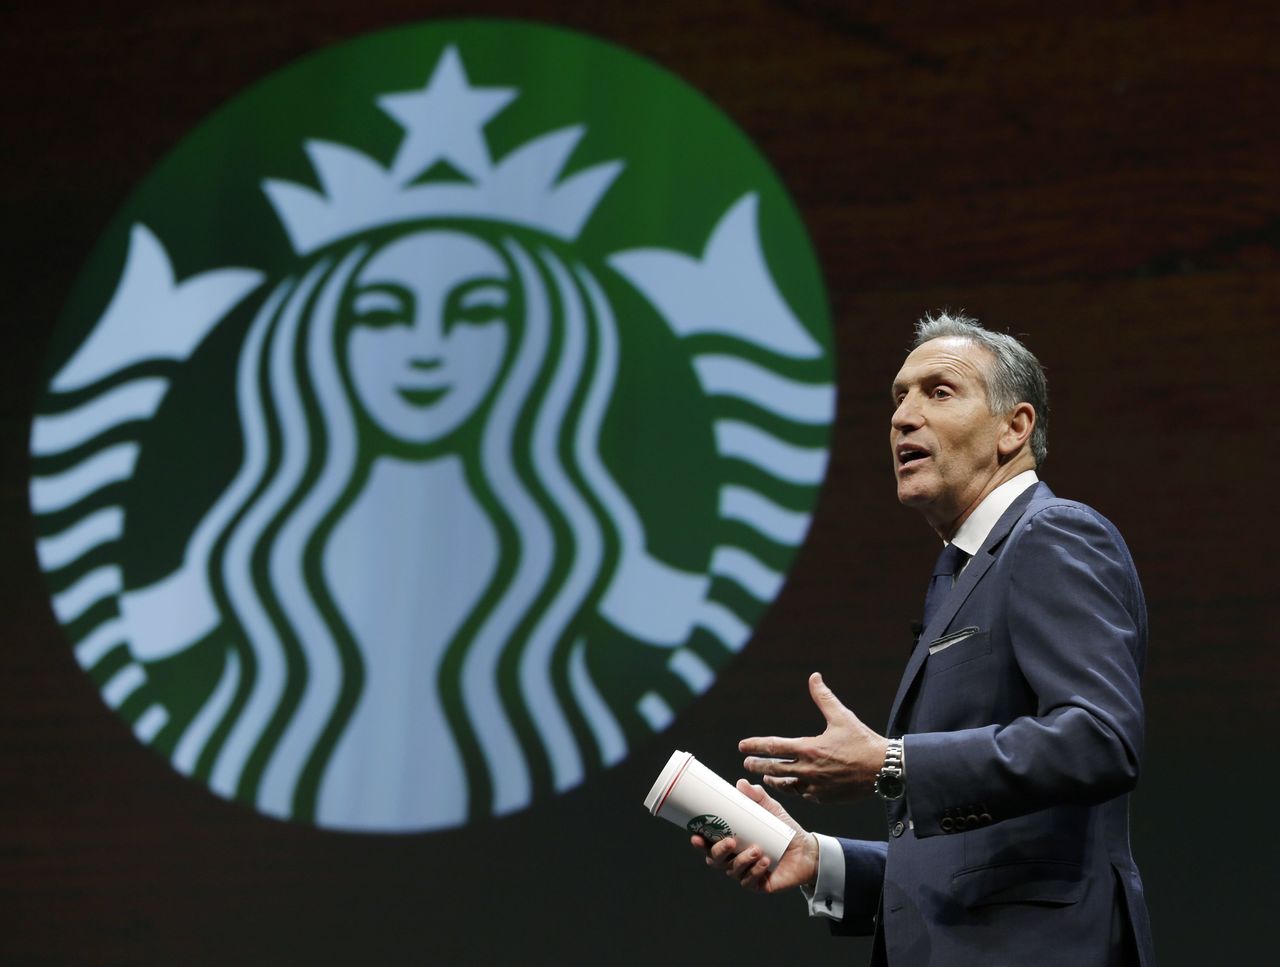 In this March 23 photo, Starbucks CEO Howard Schultz speaks at the coffee company’s annual shareholders meeting in Seattle.